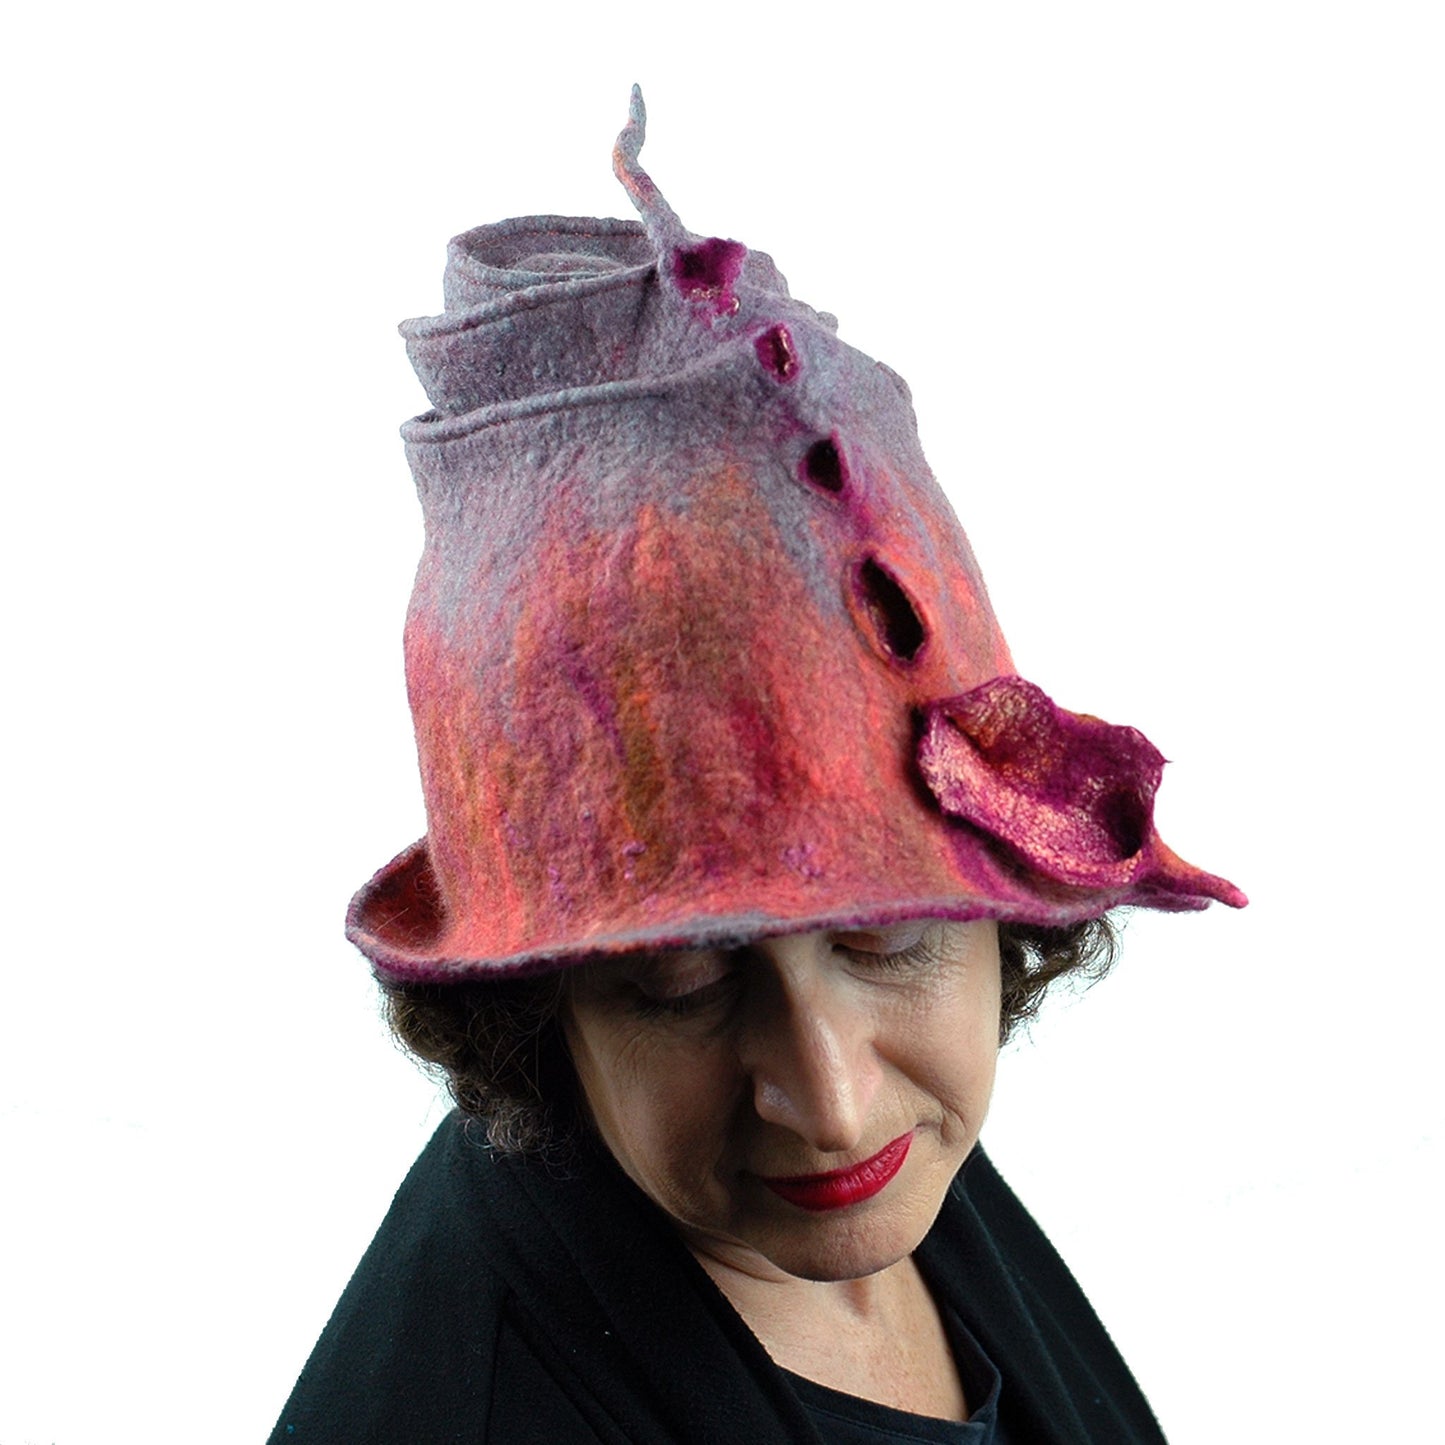 Felted Wizard Hat in Coral, Magenta and Gray - top view